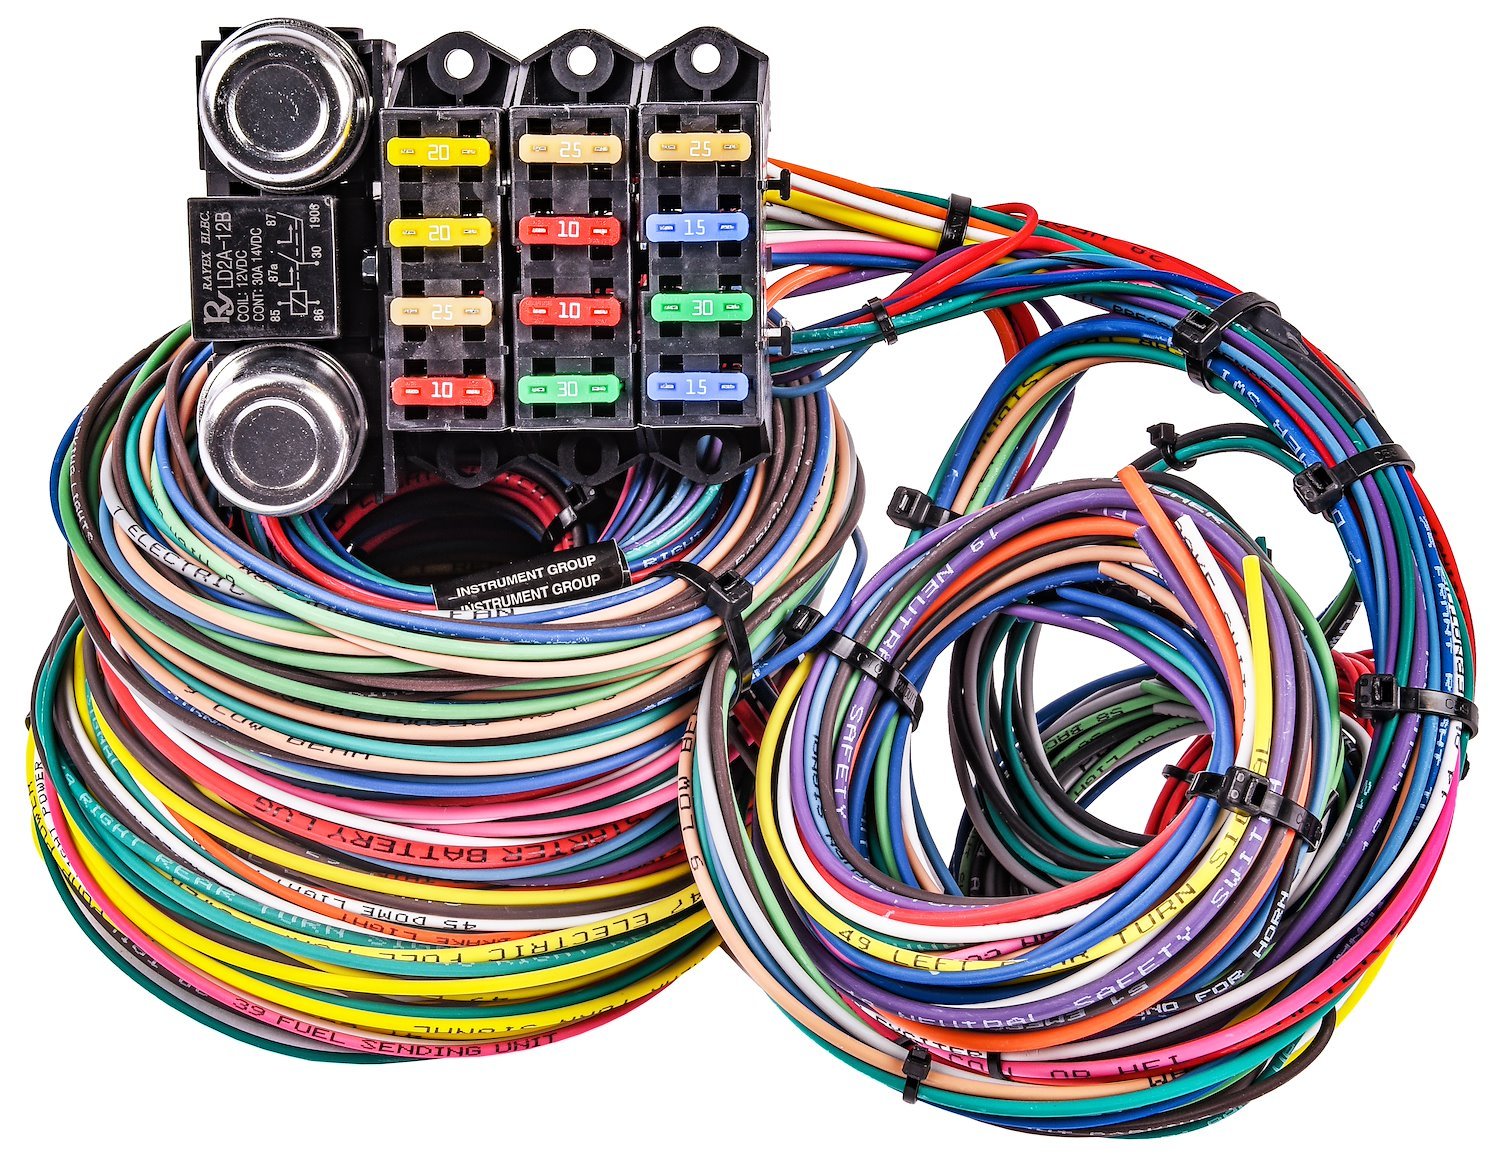 Jegs 10411 14 Circuit Wiring Harness, Ron Francis Wiring Harness Instructions Pdf